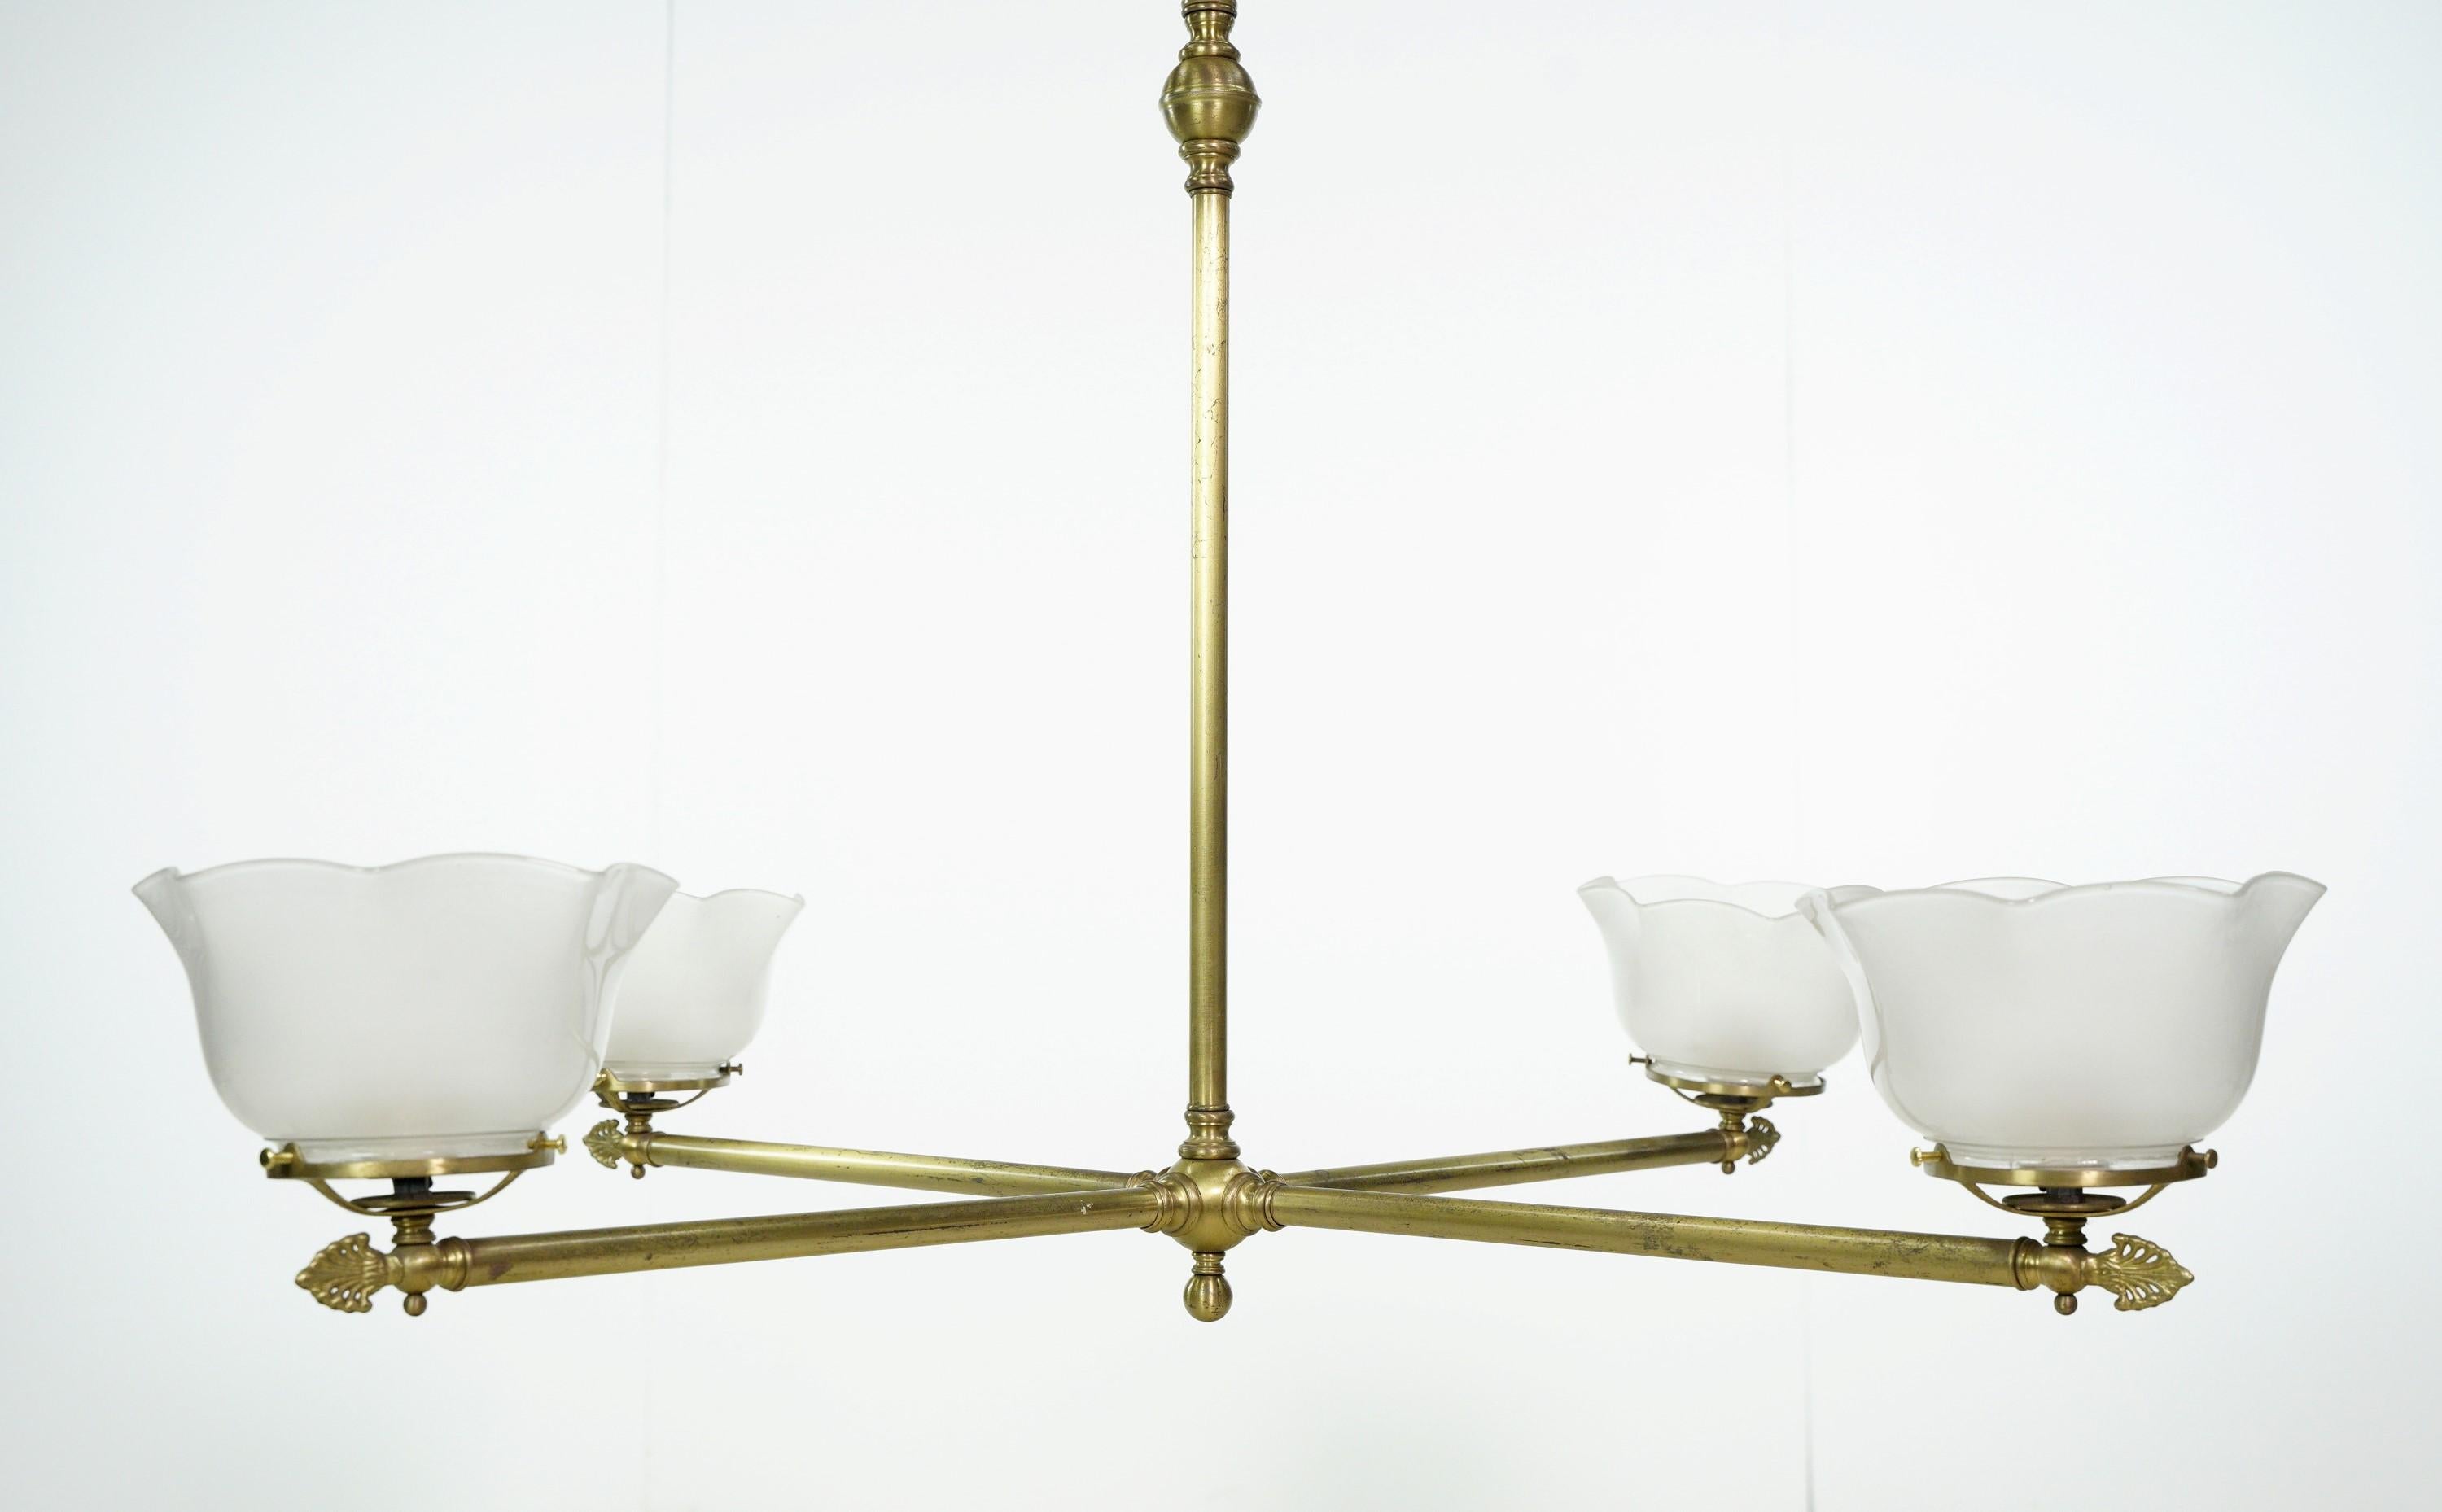 This Modern style brass plated steel four arm ruffled glass shades chandelier showcases modern elegance. The brass plated steel frame creates a sleek and stylish look, while the ruffled glass shades add a touch of sophistication. This chandelier